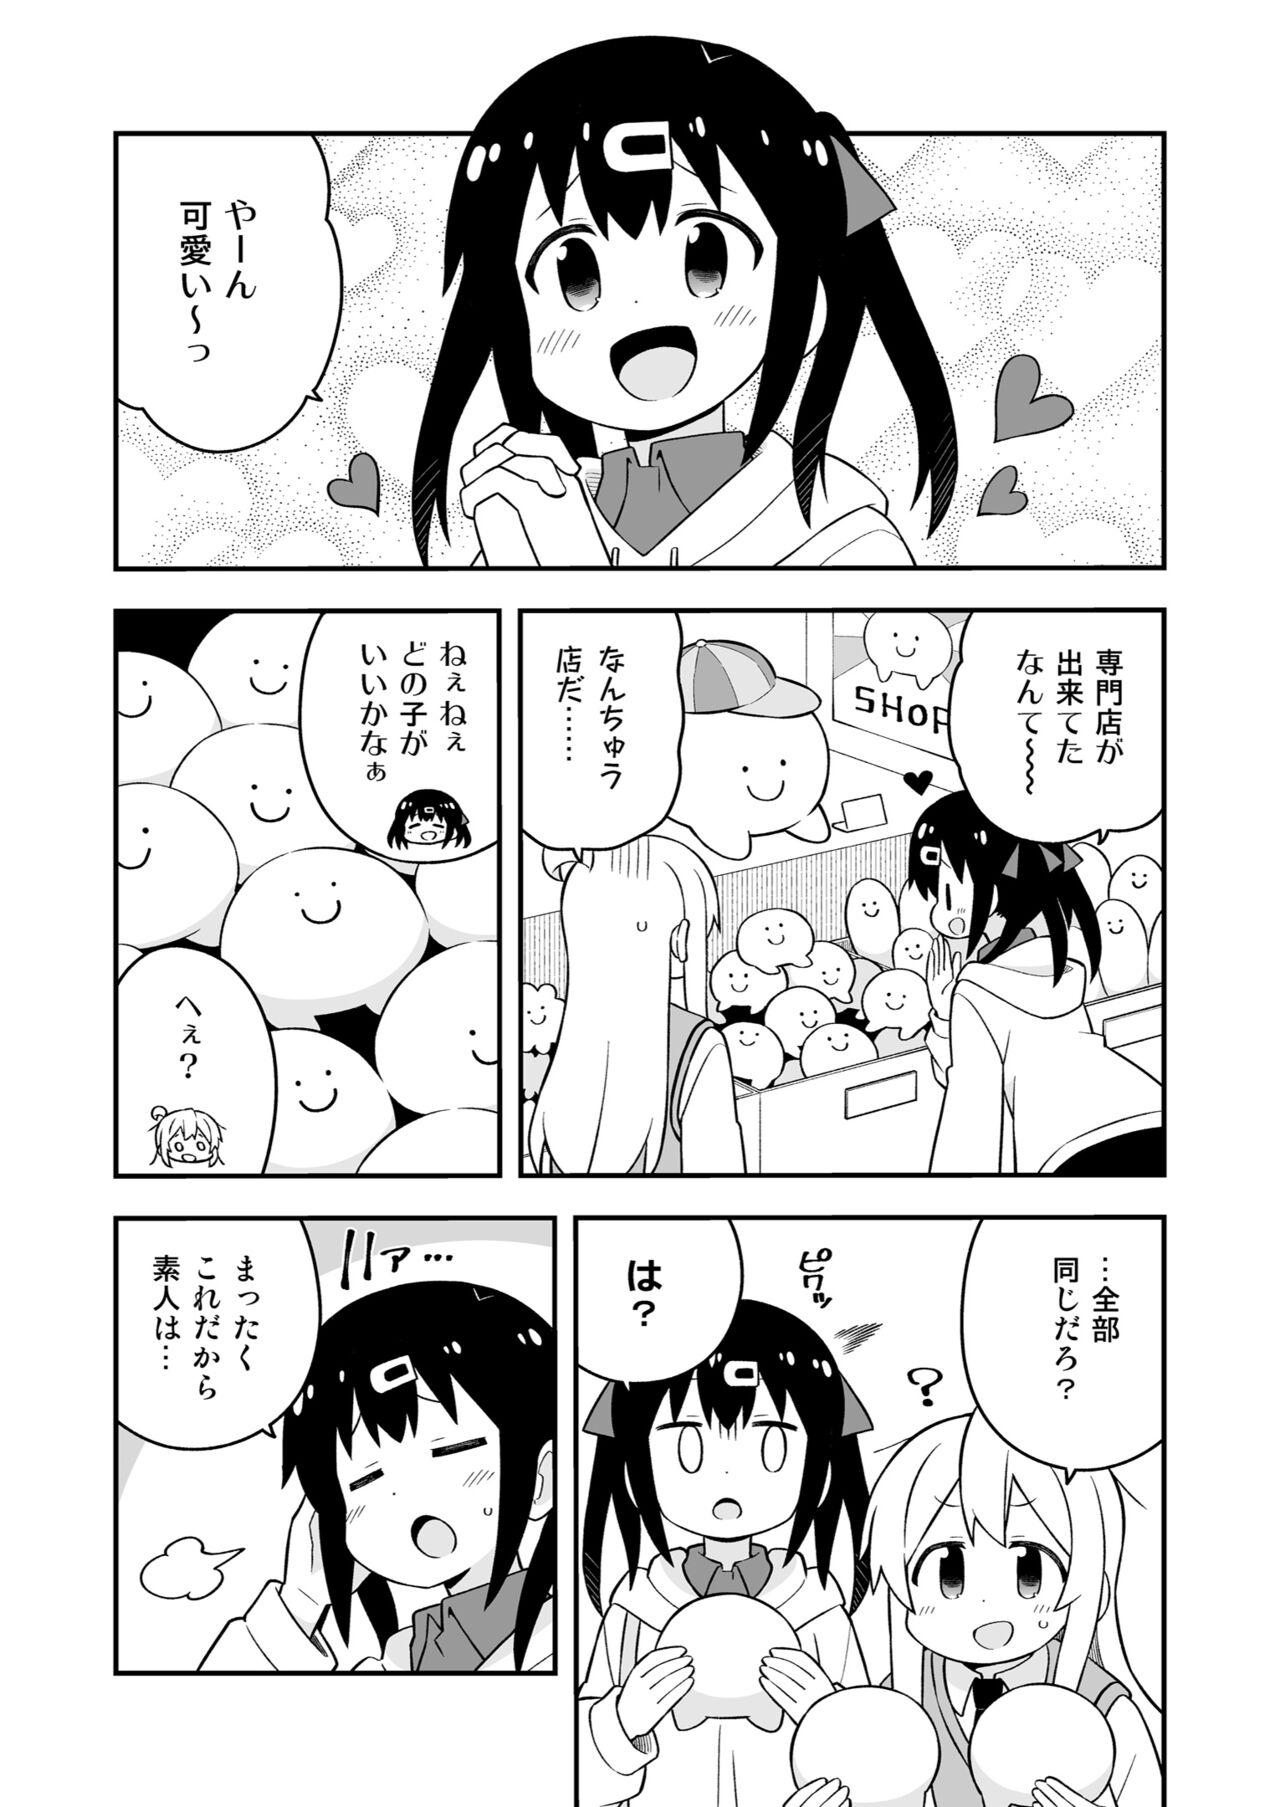 Long Onii-chan wa Oshimai! 23 - Onii chan wa oshimai Naturaltits - Page 5